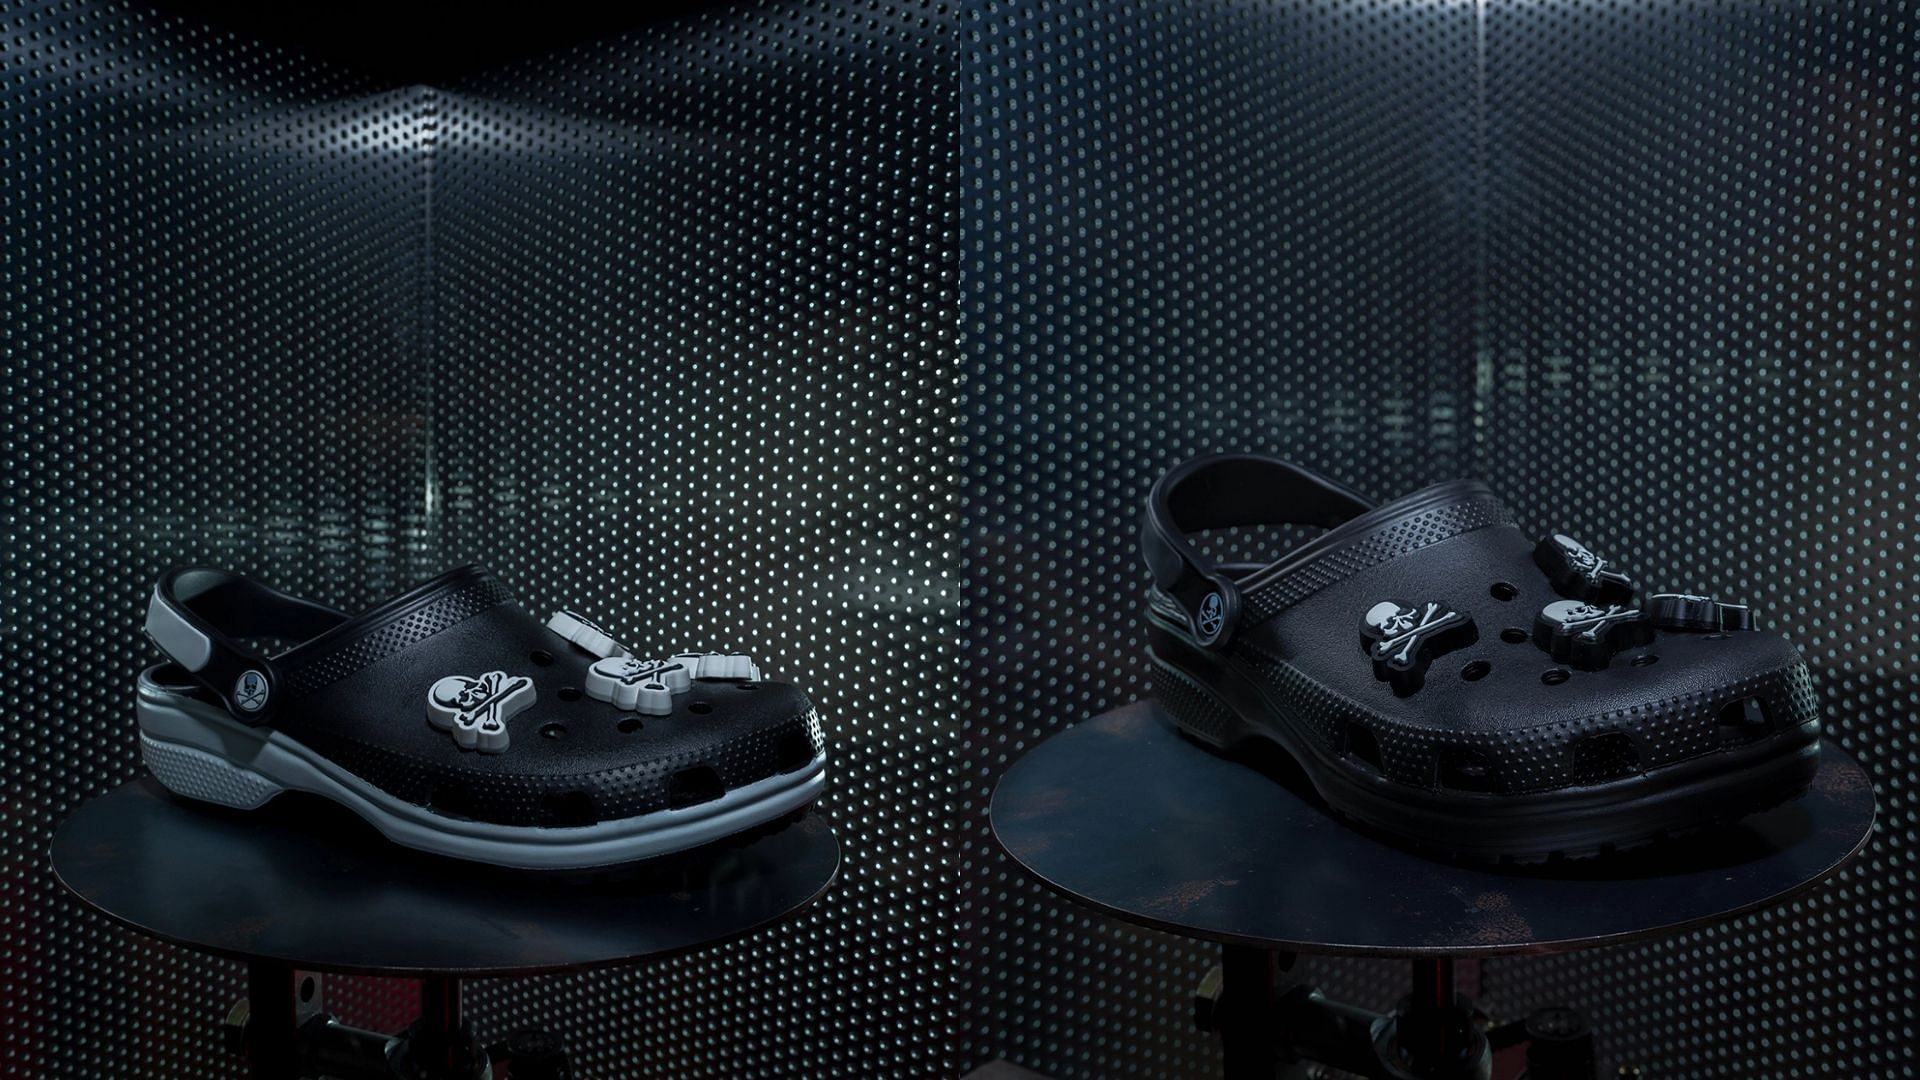 Where to buy the Mastermind Japan x Crocs footwear collection 